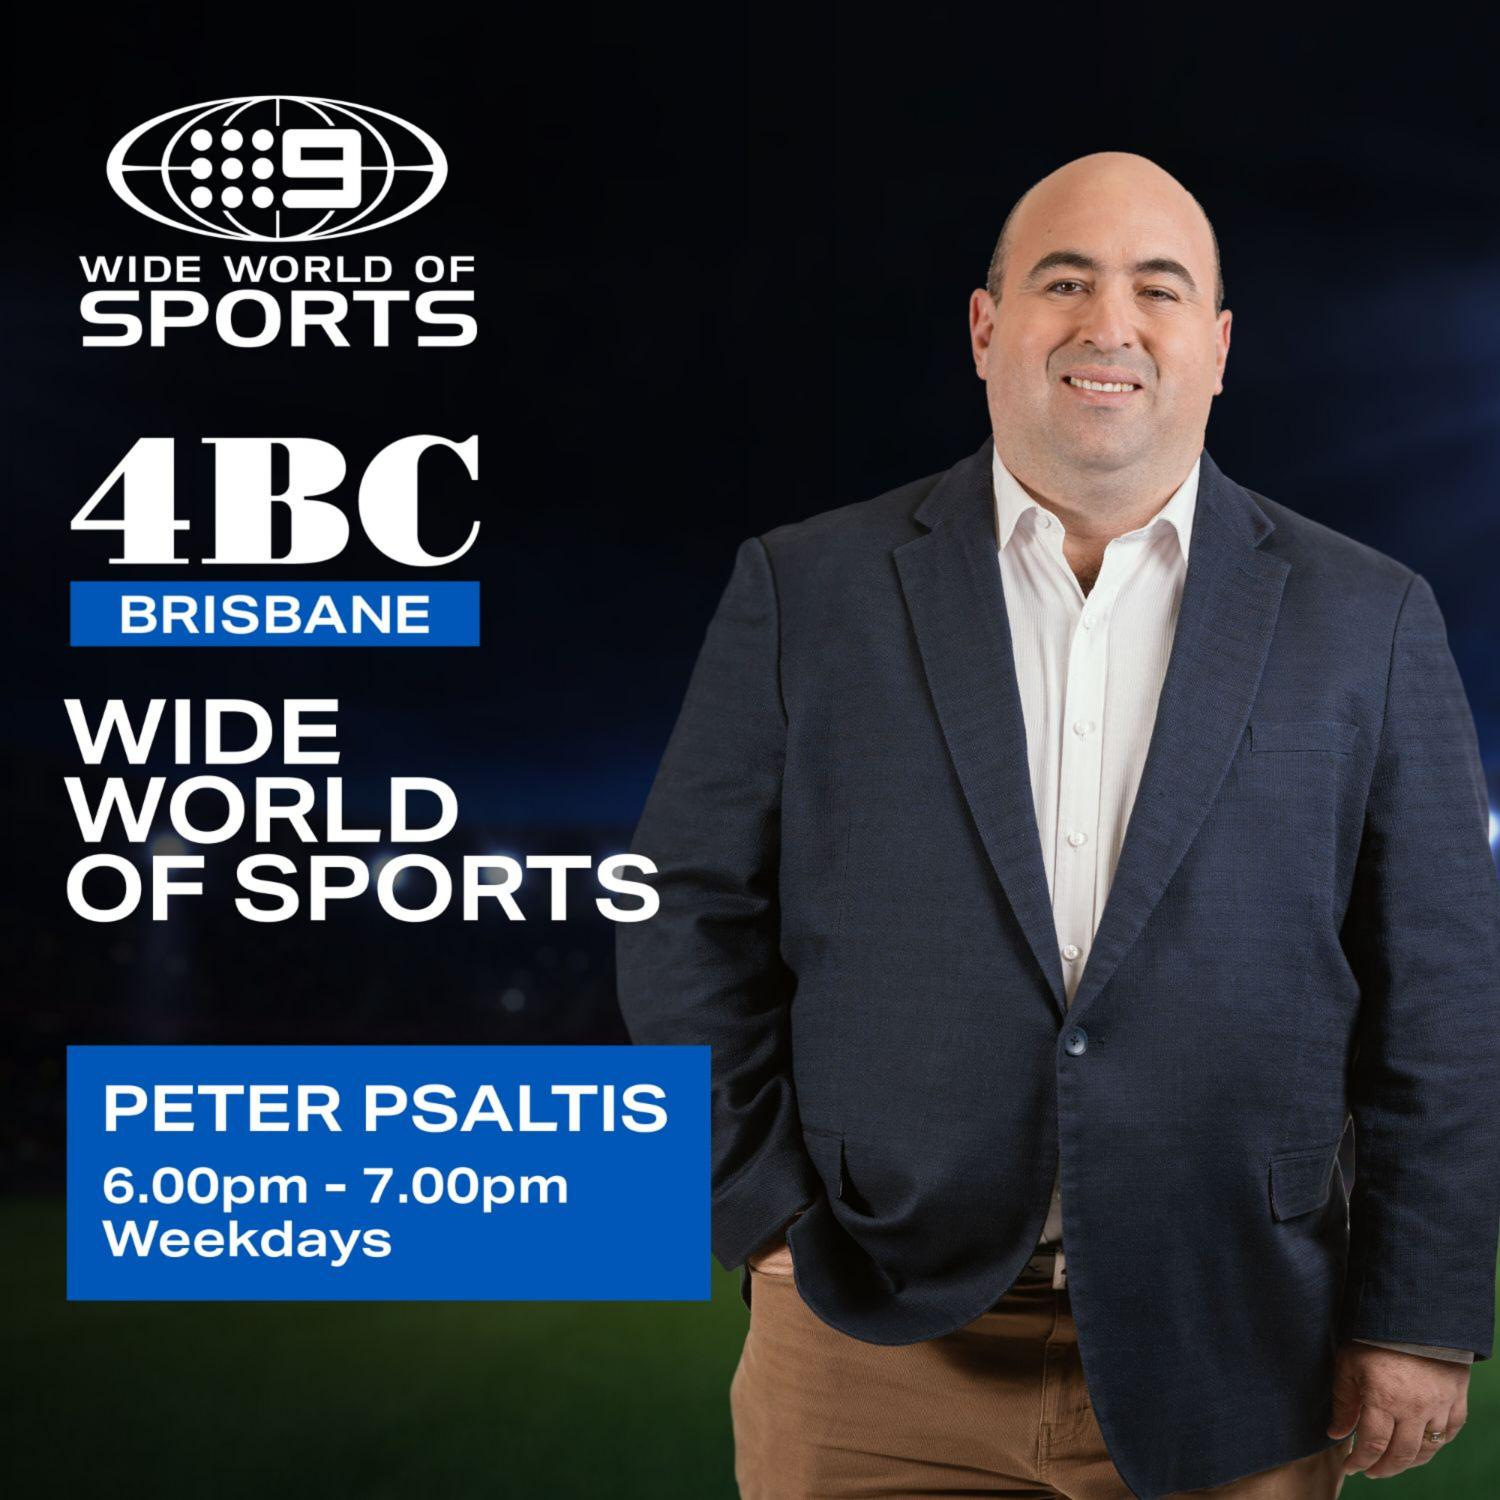 Peter Psaltis on the reports the Dolphins will be awarded the 17th NRL license